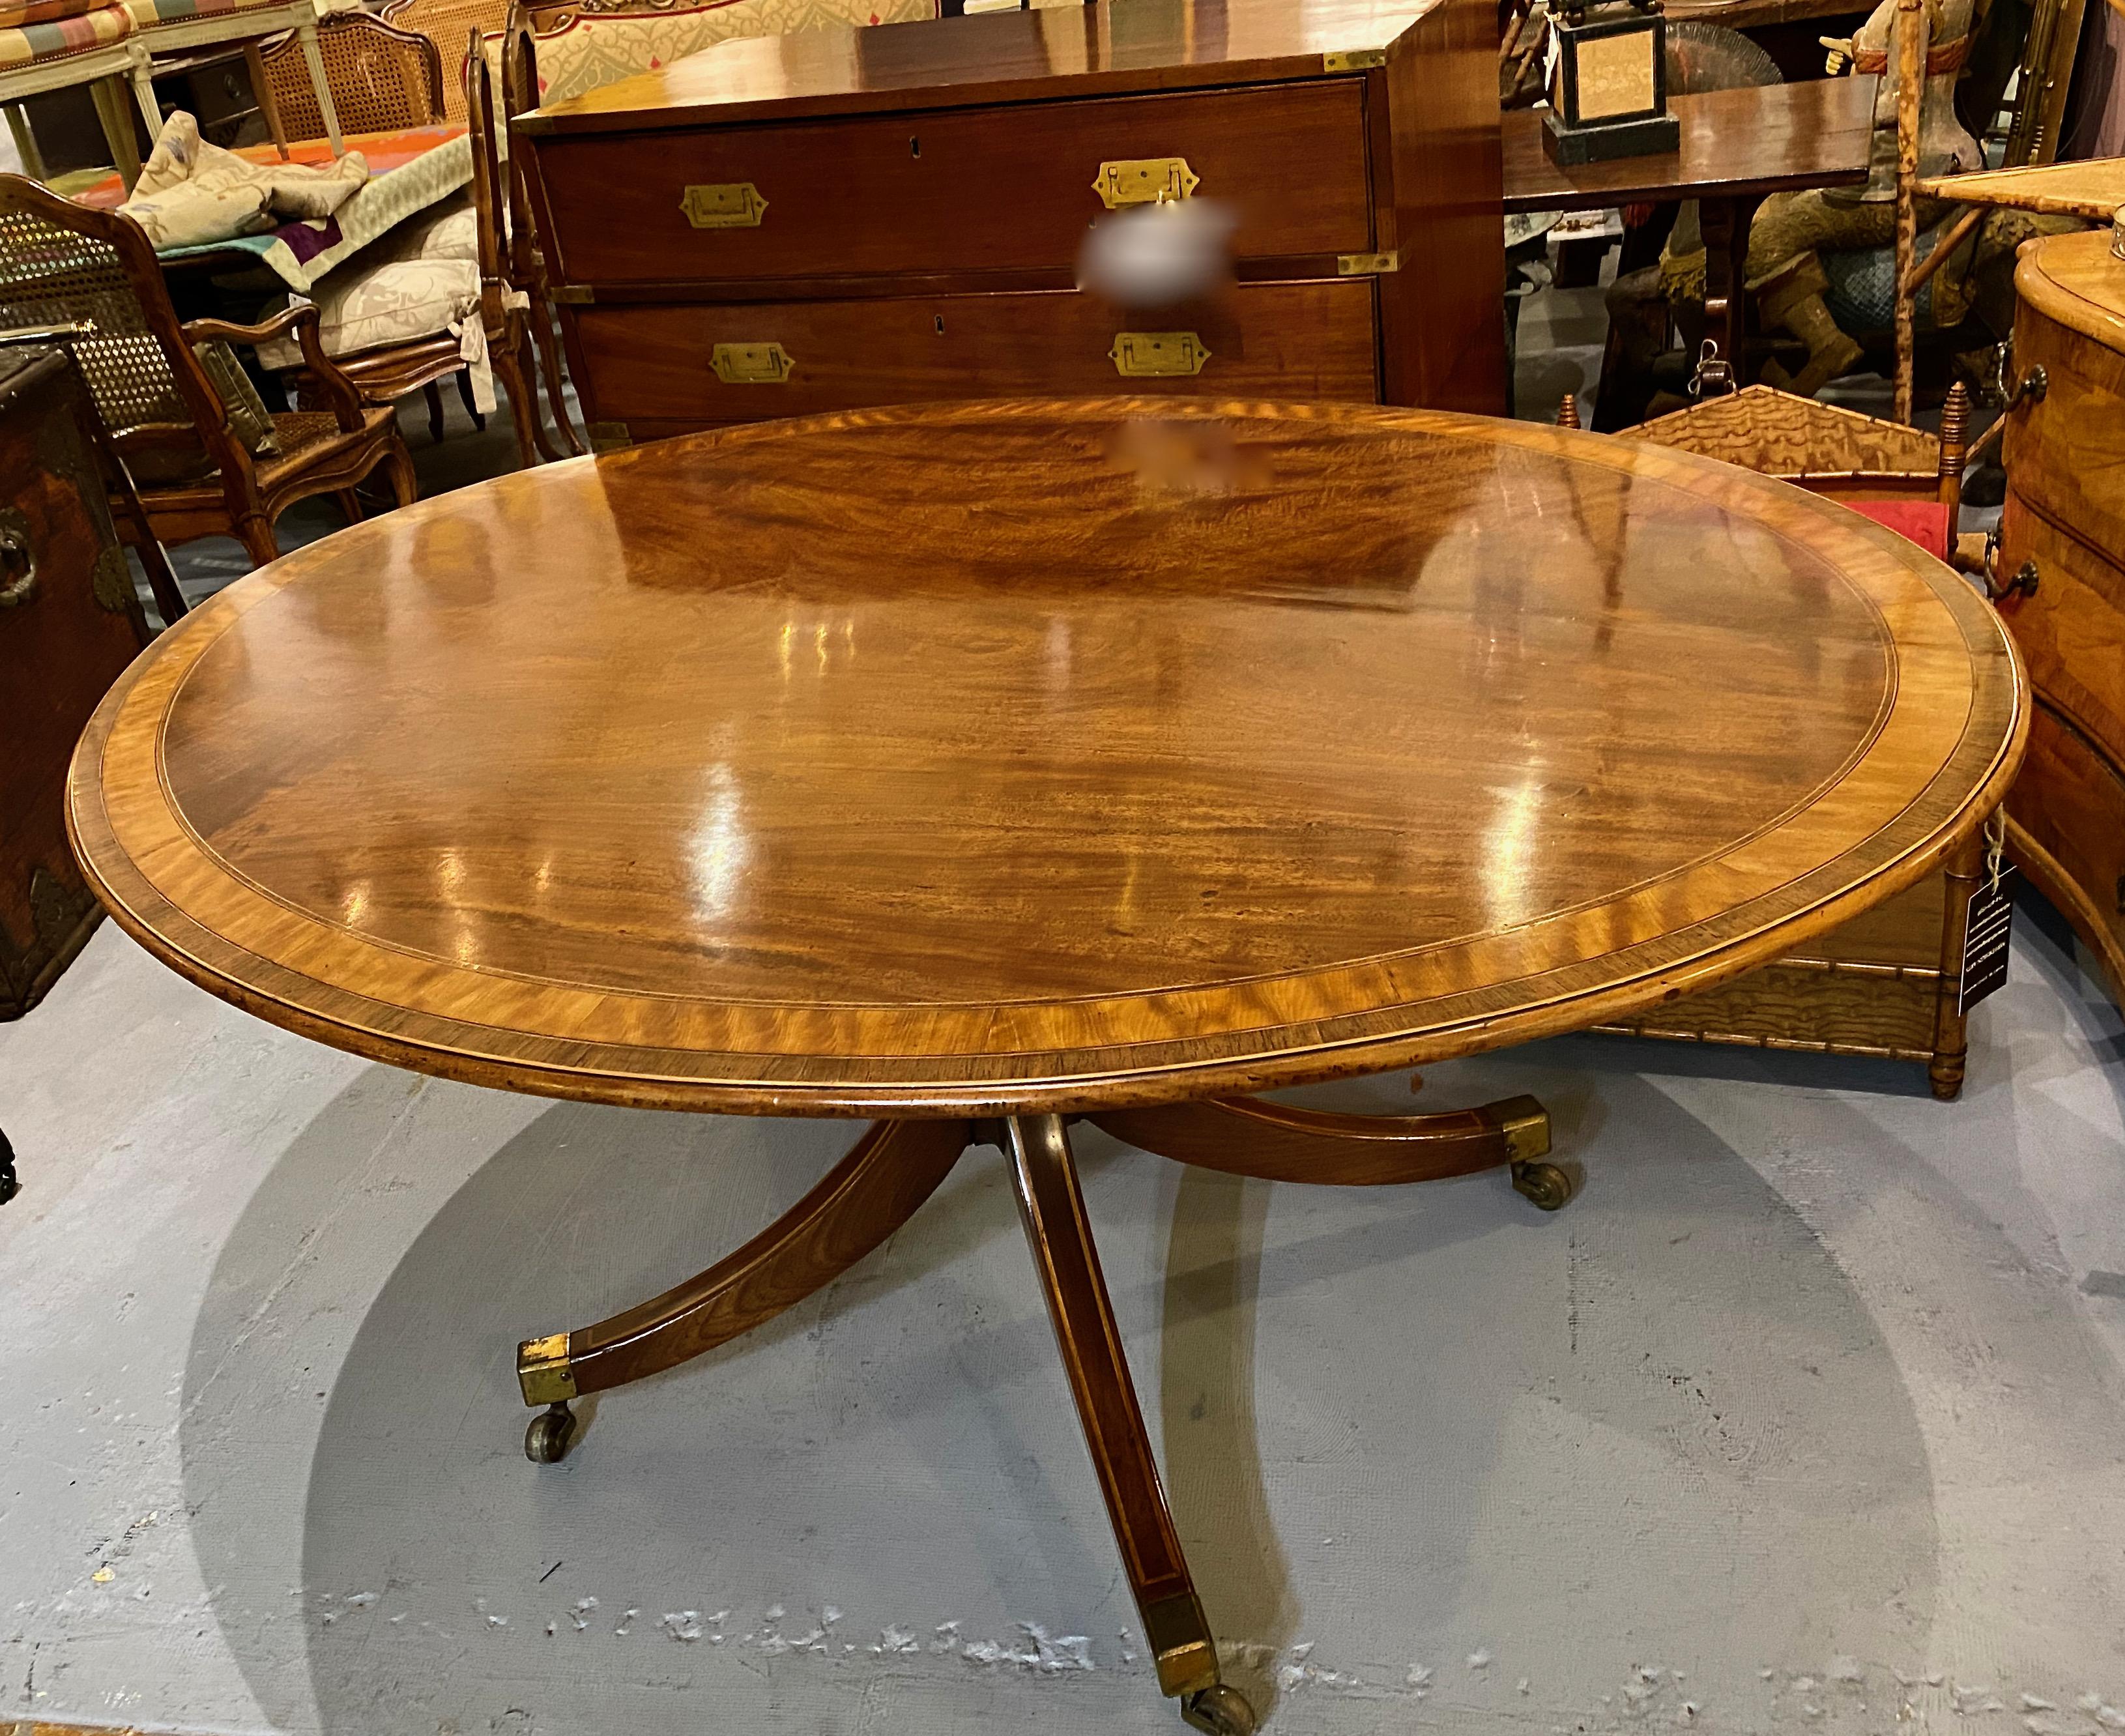 This is a very good example of an elegant, large late George III tilt-top breakfast table. The top is is banded in kingwood and satin wood, with an additional 7 individual lines of inlay. The pedestal features 4 line-inlaid out-splayed legs